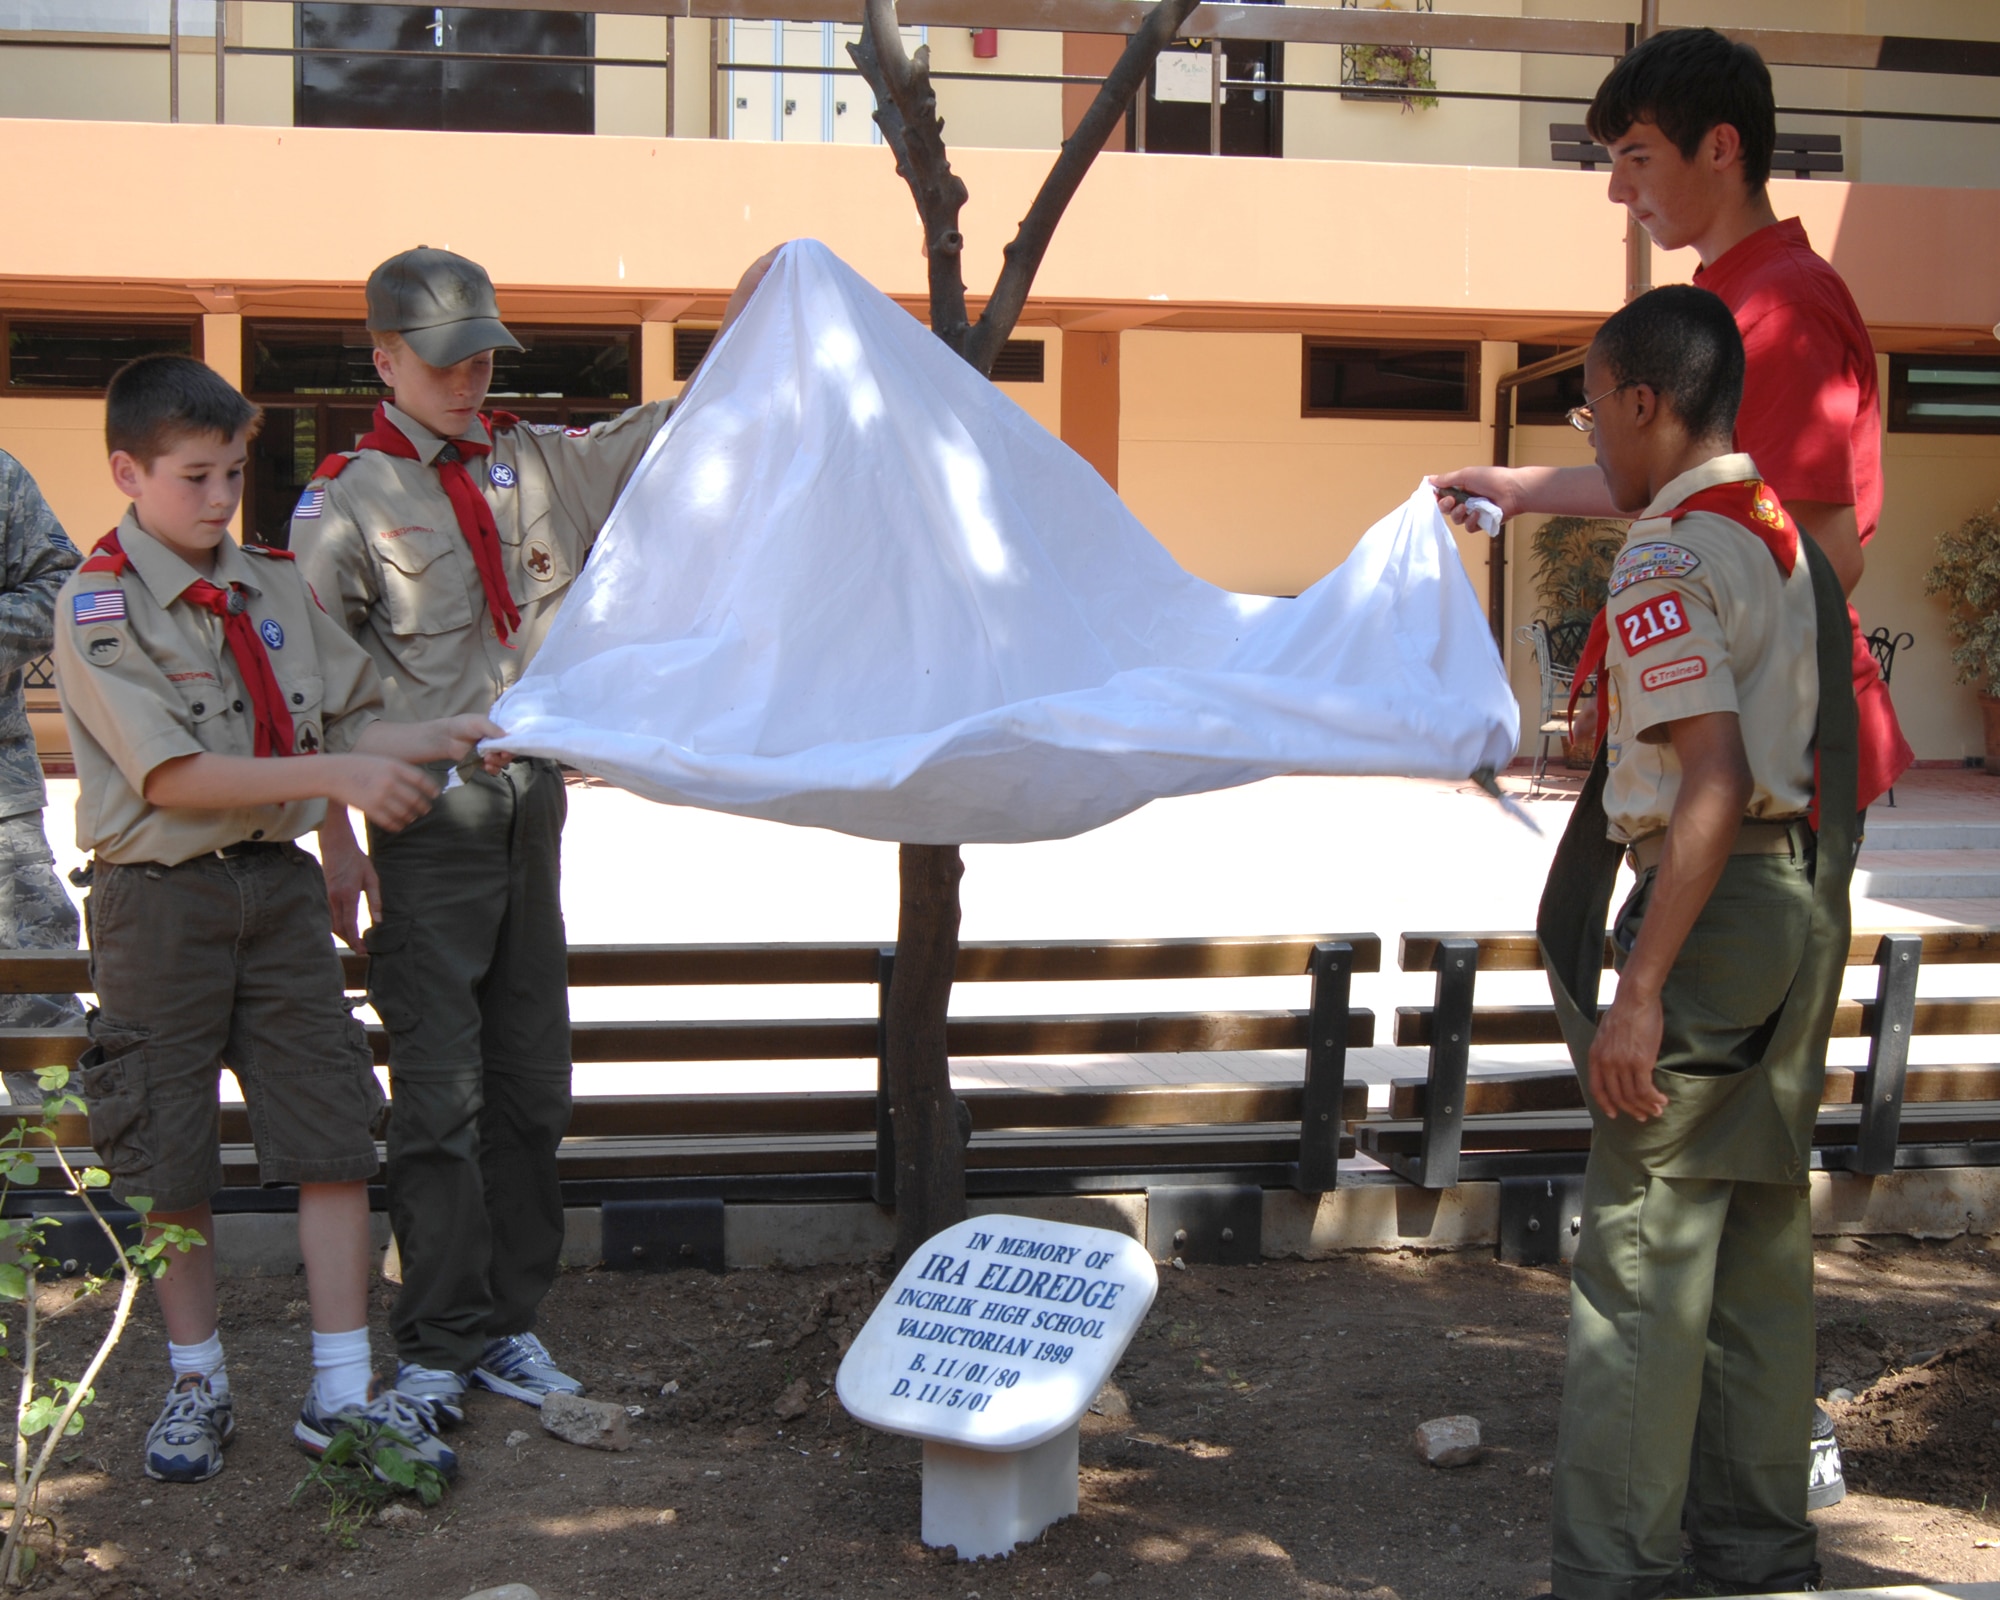 Members of Boy Scout troop 218 unveil the Ira Eldridge memorial marker Wednesday, June 3, 2009 during the Ira Eldridge Memorial Re-dedication ceremony at Incirlik Unit School, Incirlik, Air Base, Turkey. The troop honored the memory of Eagle Scout Eldridge who died in 2001 of leukemia. Ira Eldridge was also the class of 1999 valedictorian at Incirlik Unit School, vice president of the Incirlik Unit School National Honor Society and a member of the varsity soccer team. A memorial plaque was placed on school grounds, but fell into disrepair over the years. The scouts decided it needed to be resurrected and placed in a more prominent location so current and future generations would not forget him. (U.S. Air Force photo/ Staff Sgt. Lauren Padden)